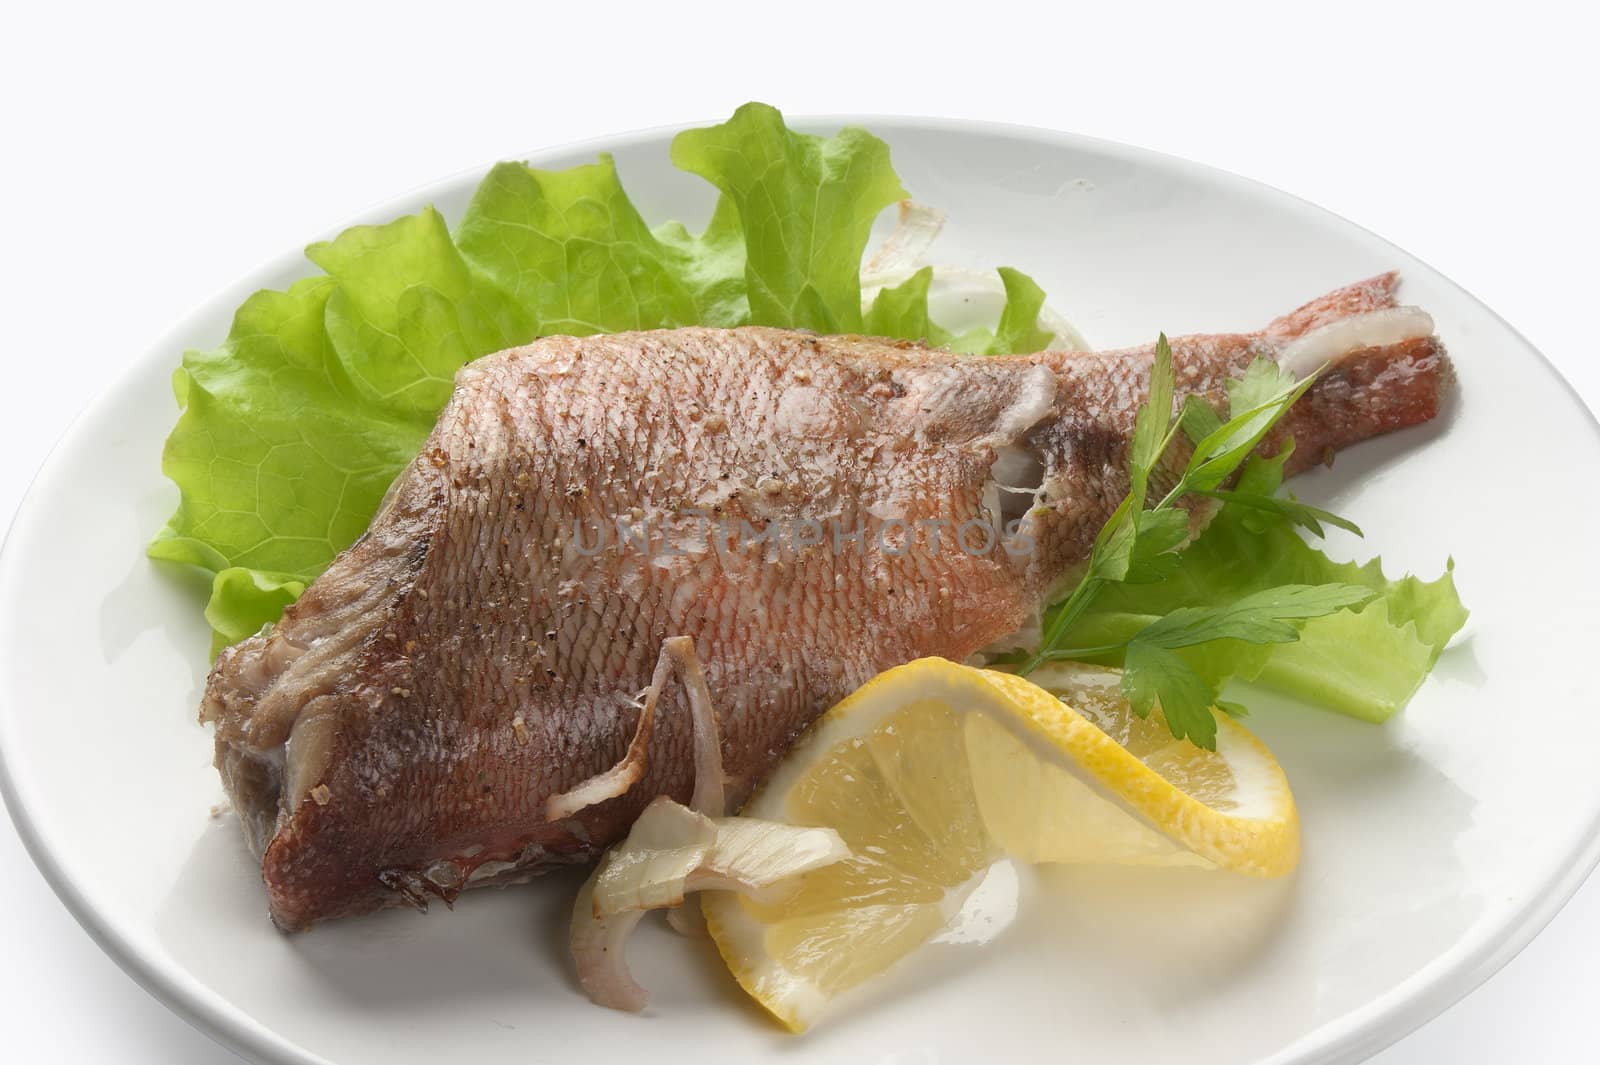 Baked rosefish with lettuce and lemon on the plate